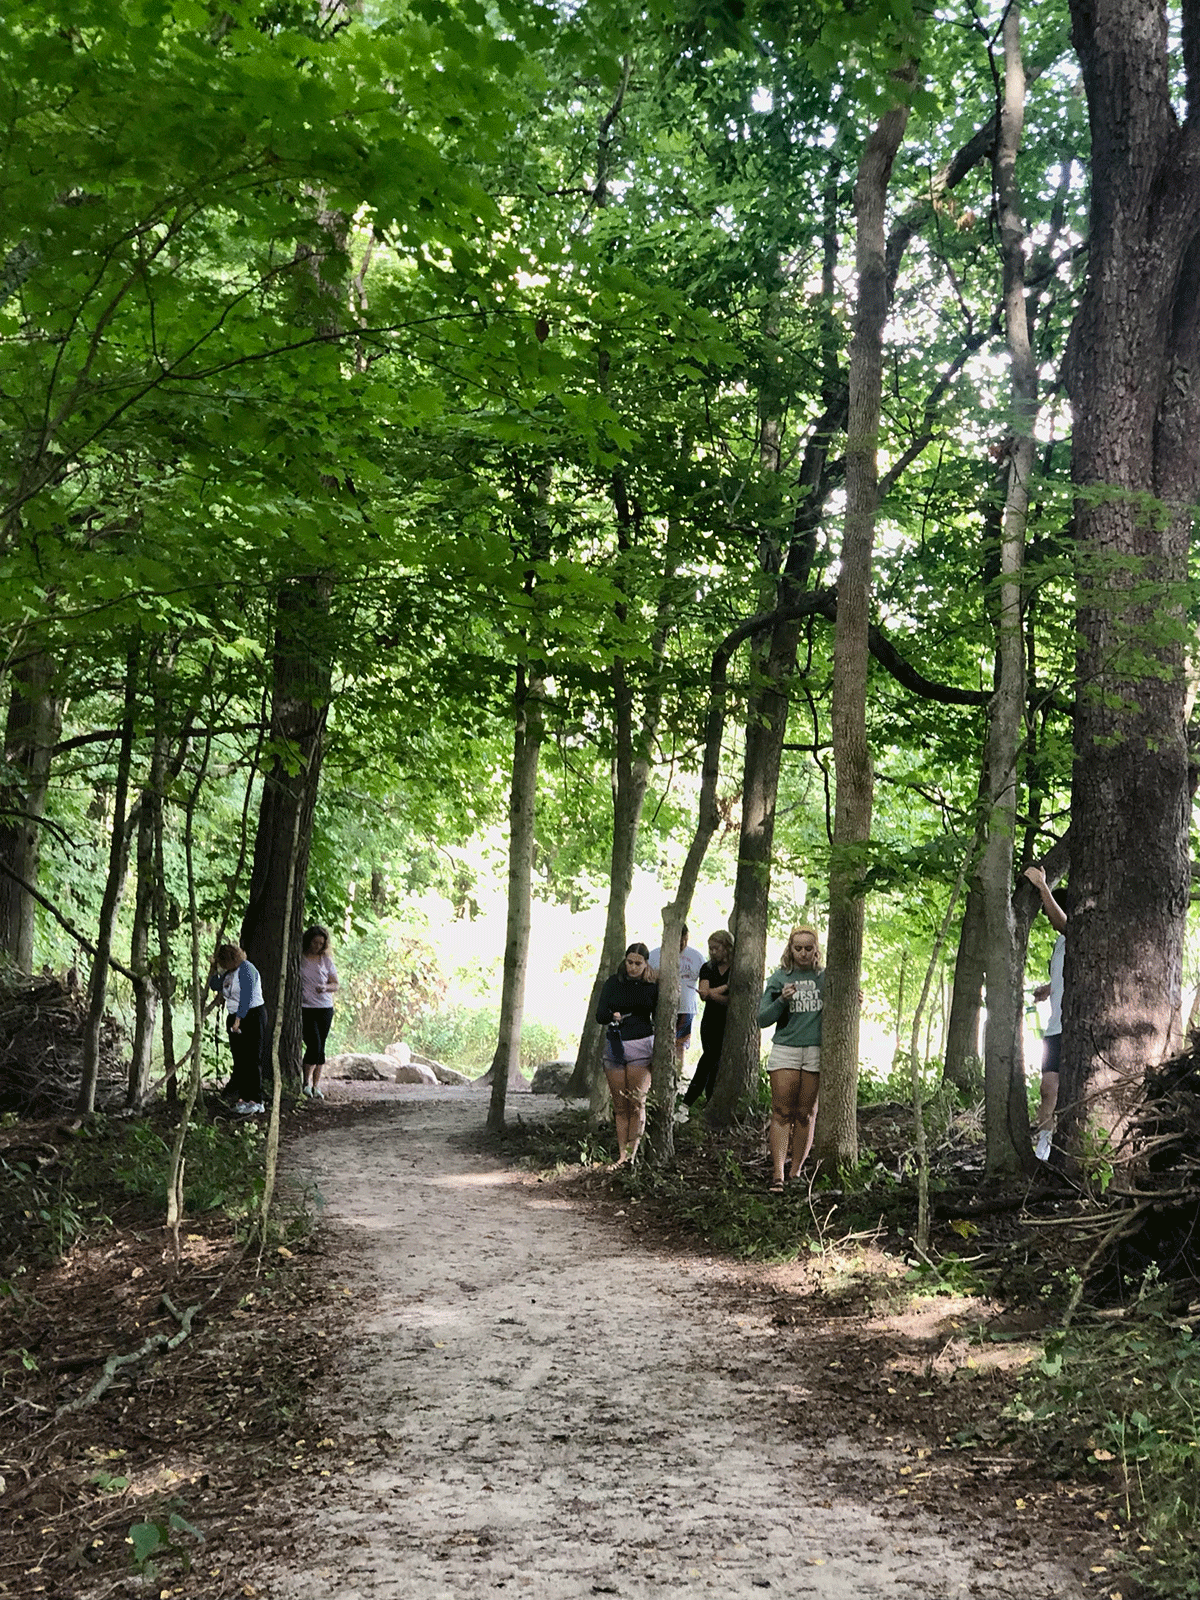 Photo of the hiking trail walked during the seminar.